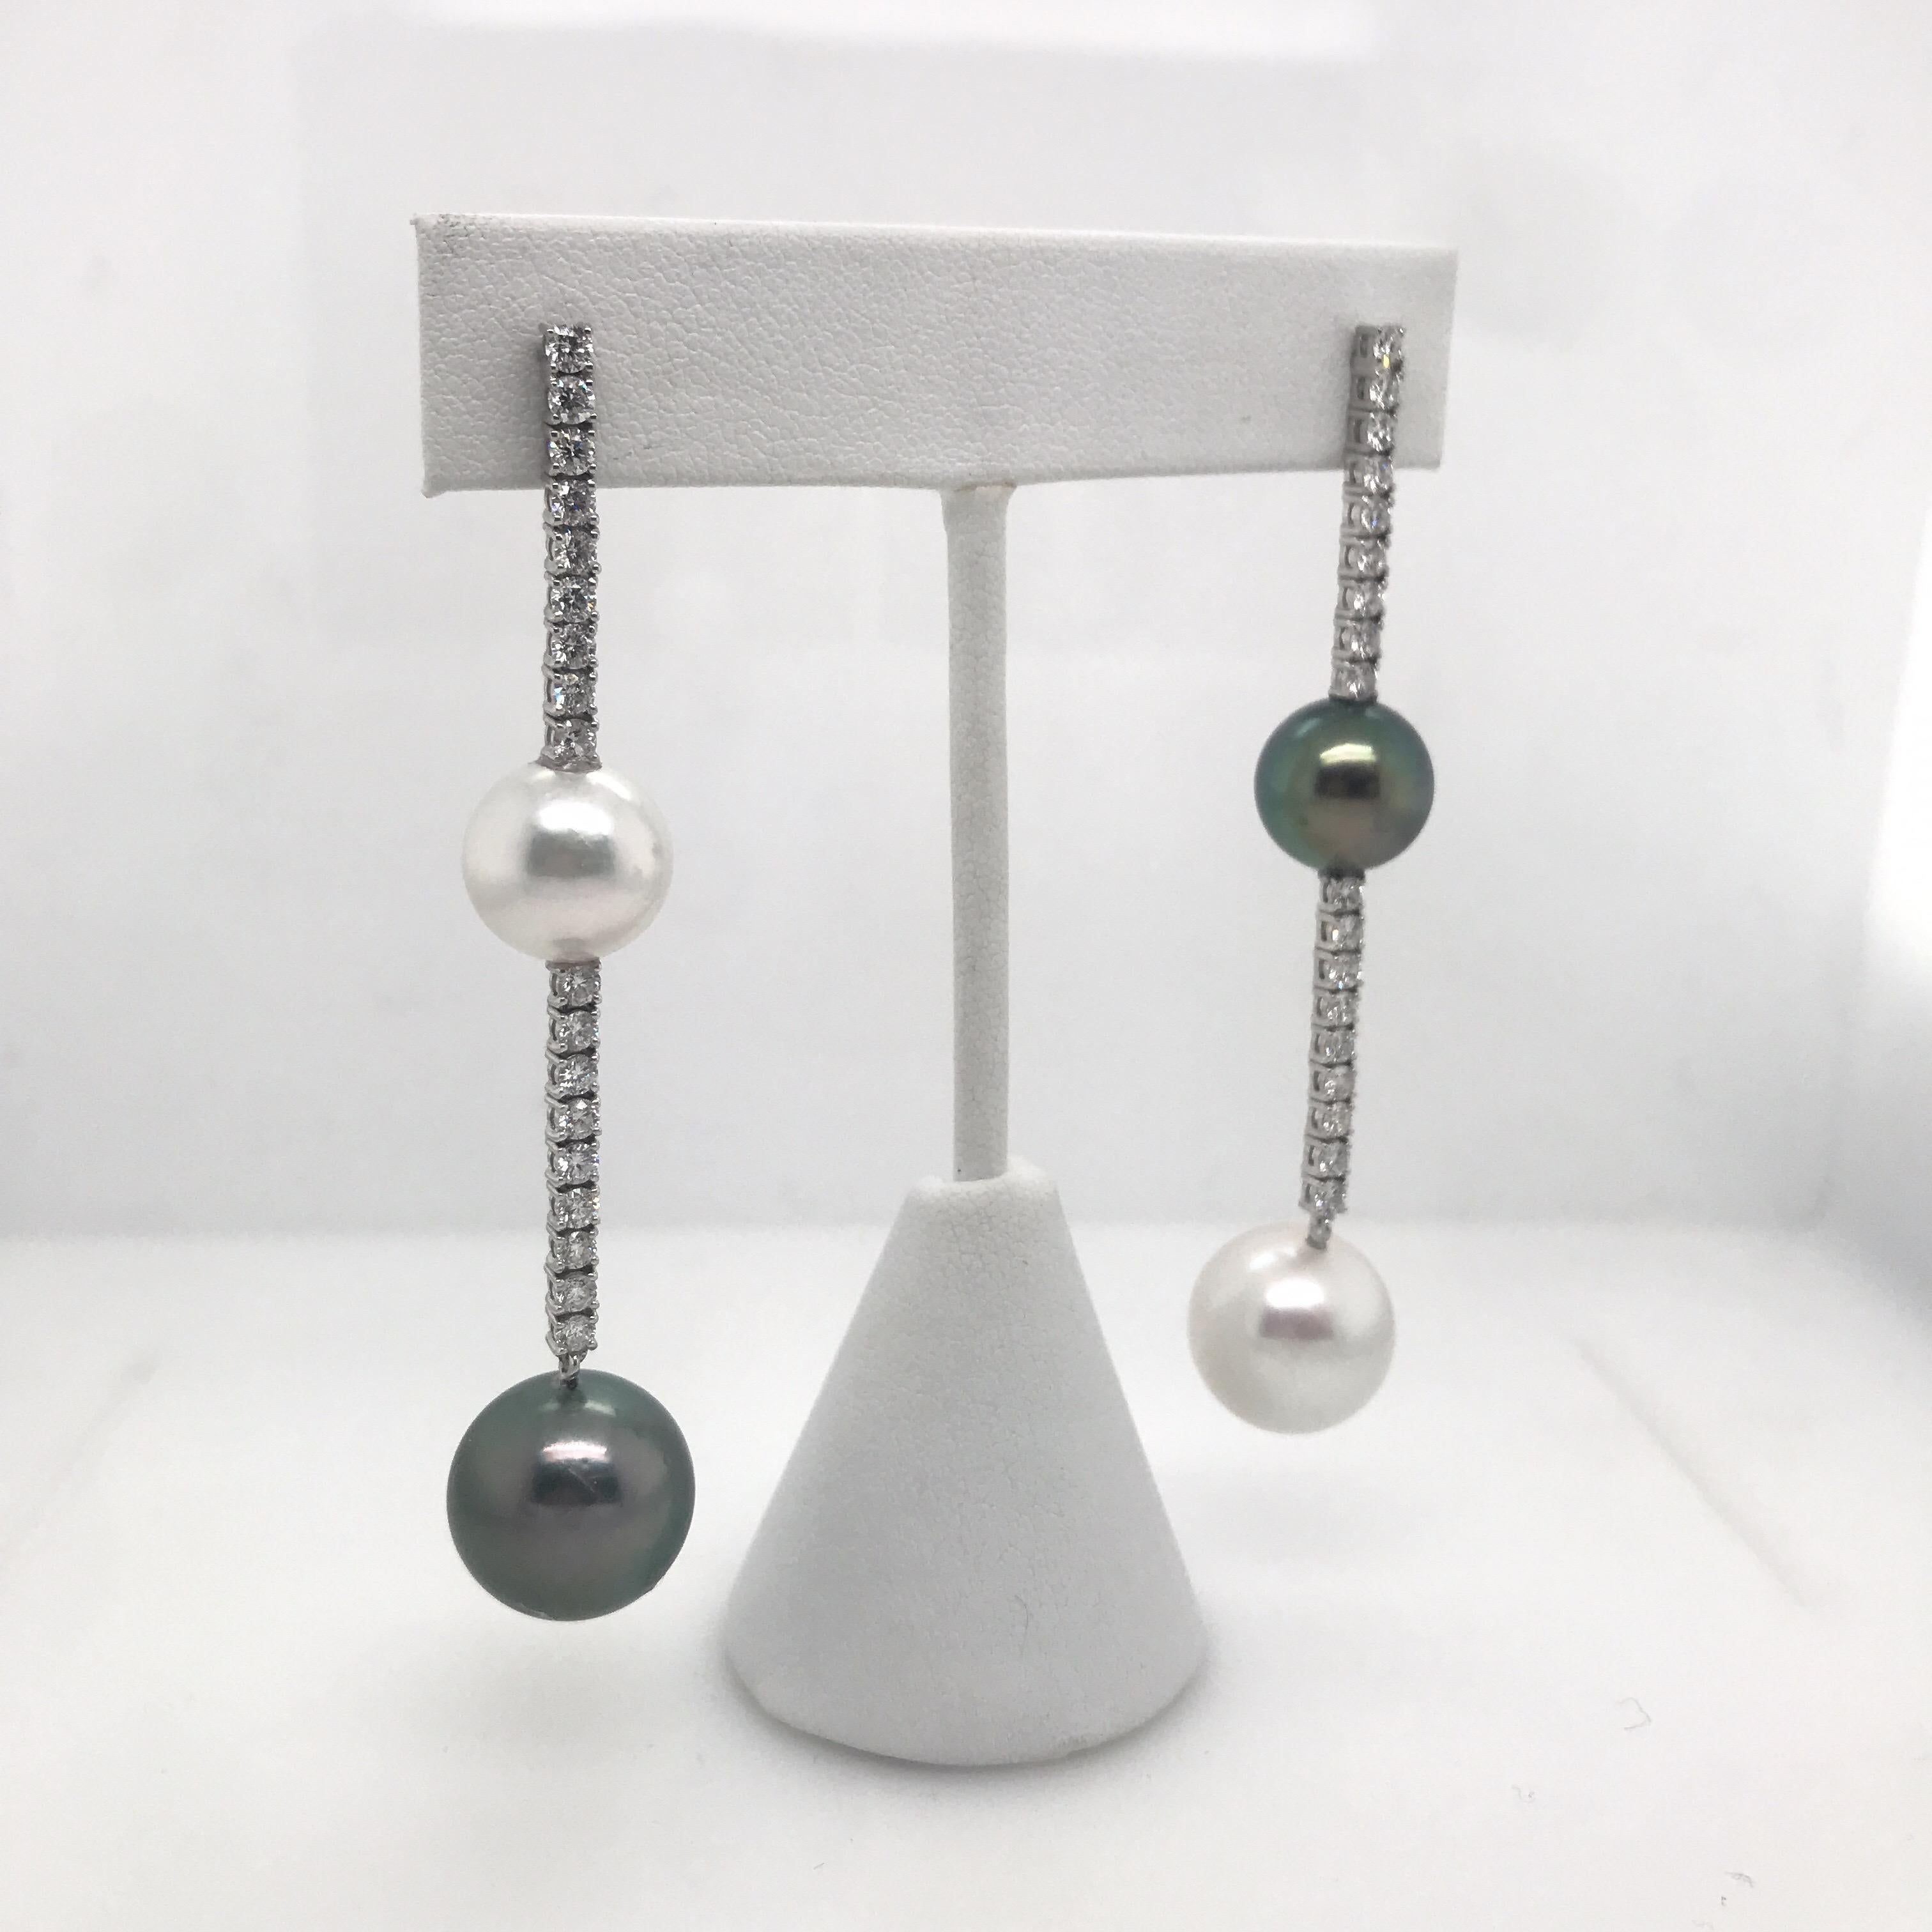 18K White gold drop earrings featuring South Sea & Tahitian pearls measuring 11-14 mm with 36 round brilliants weighing 1.81 carats.
Color G-H
Clarity SI